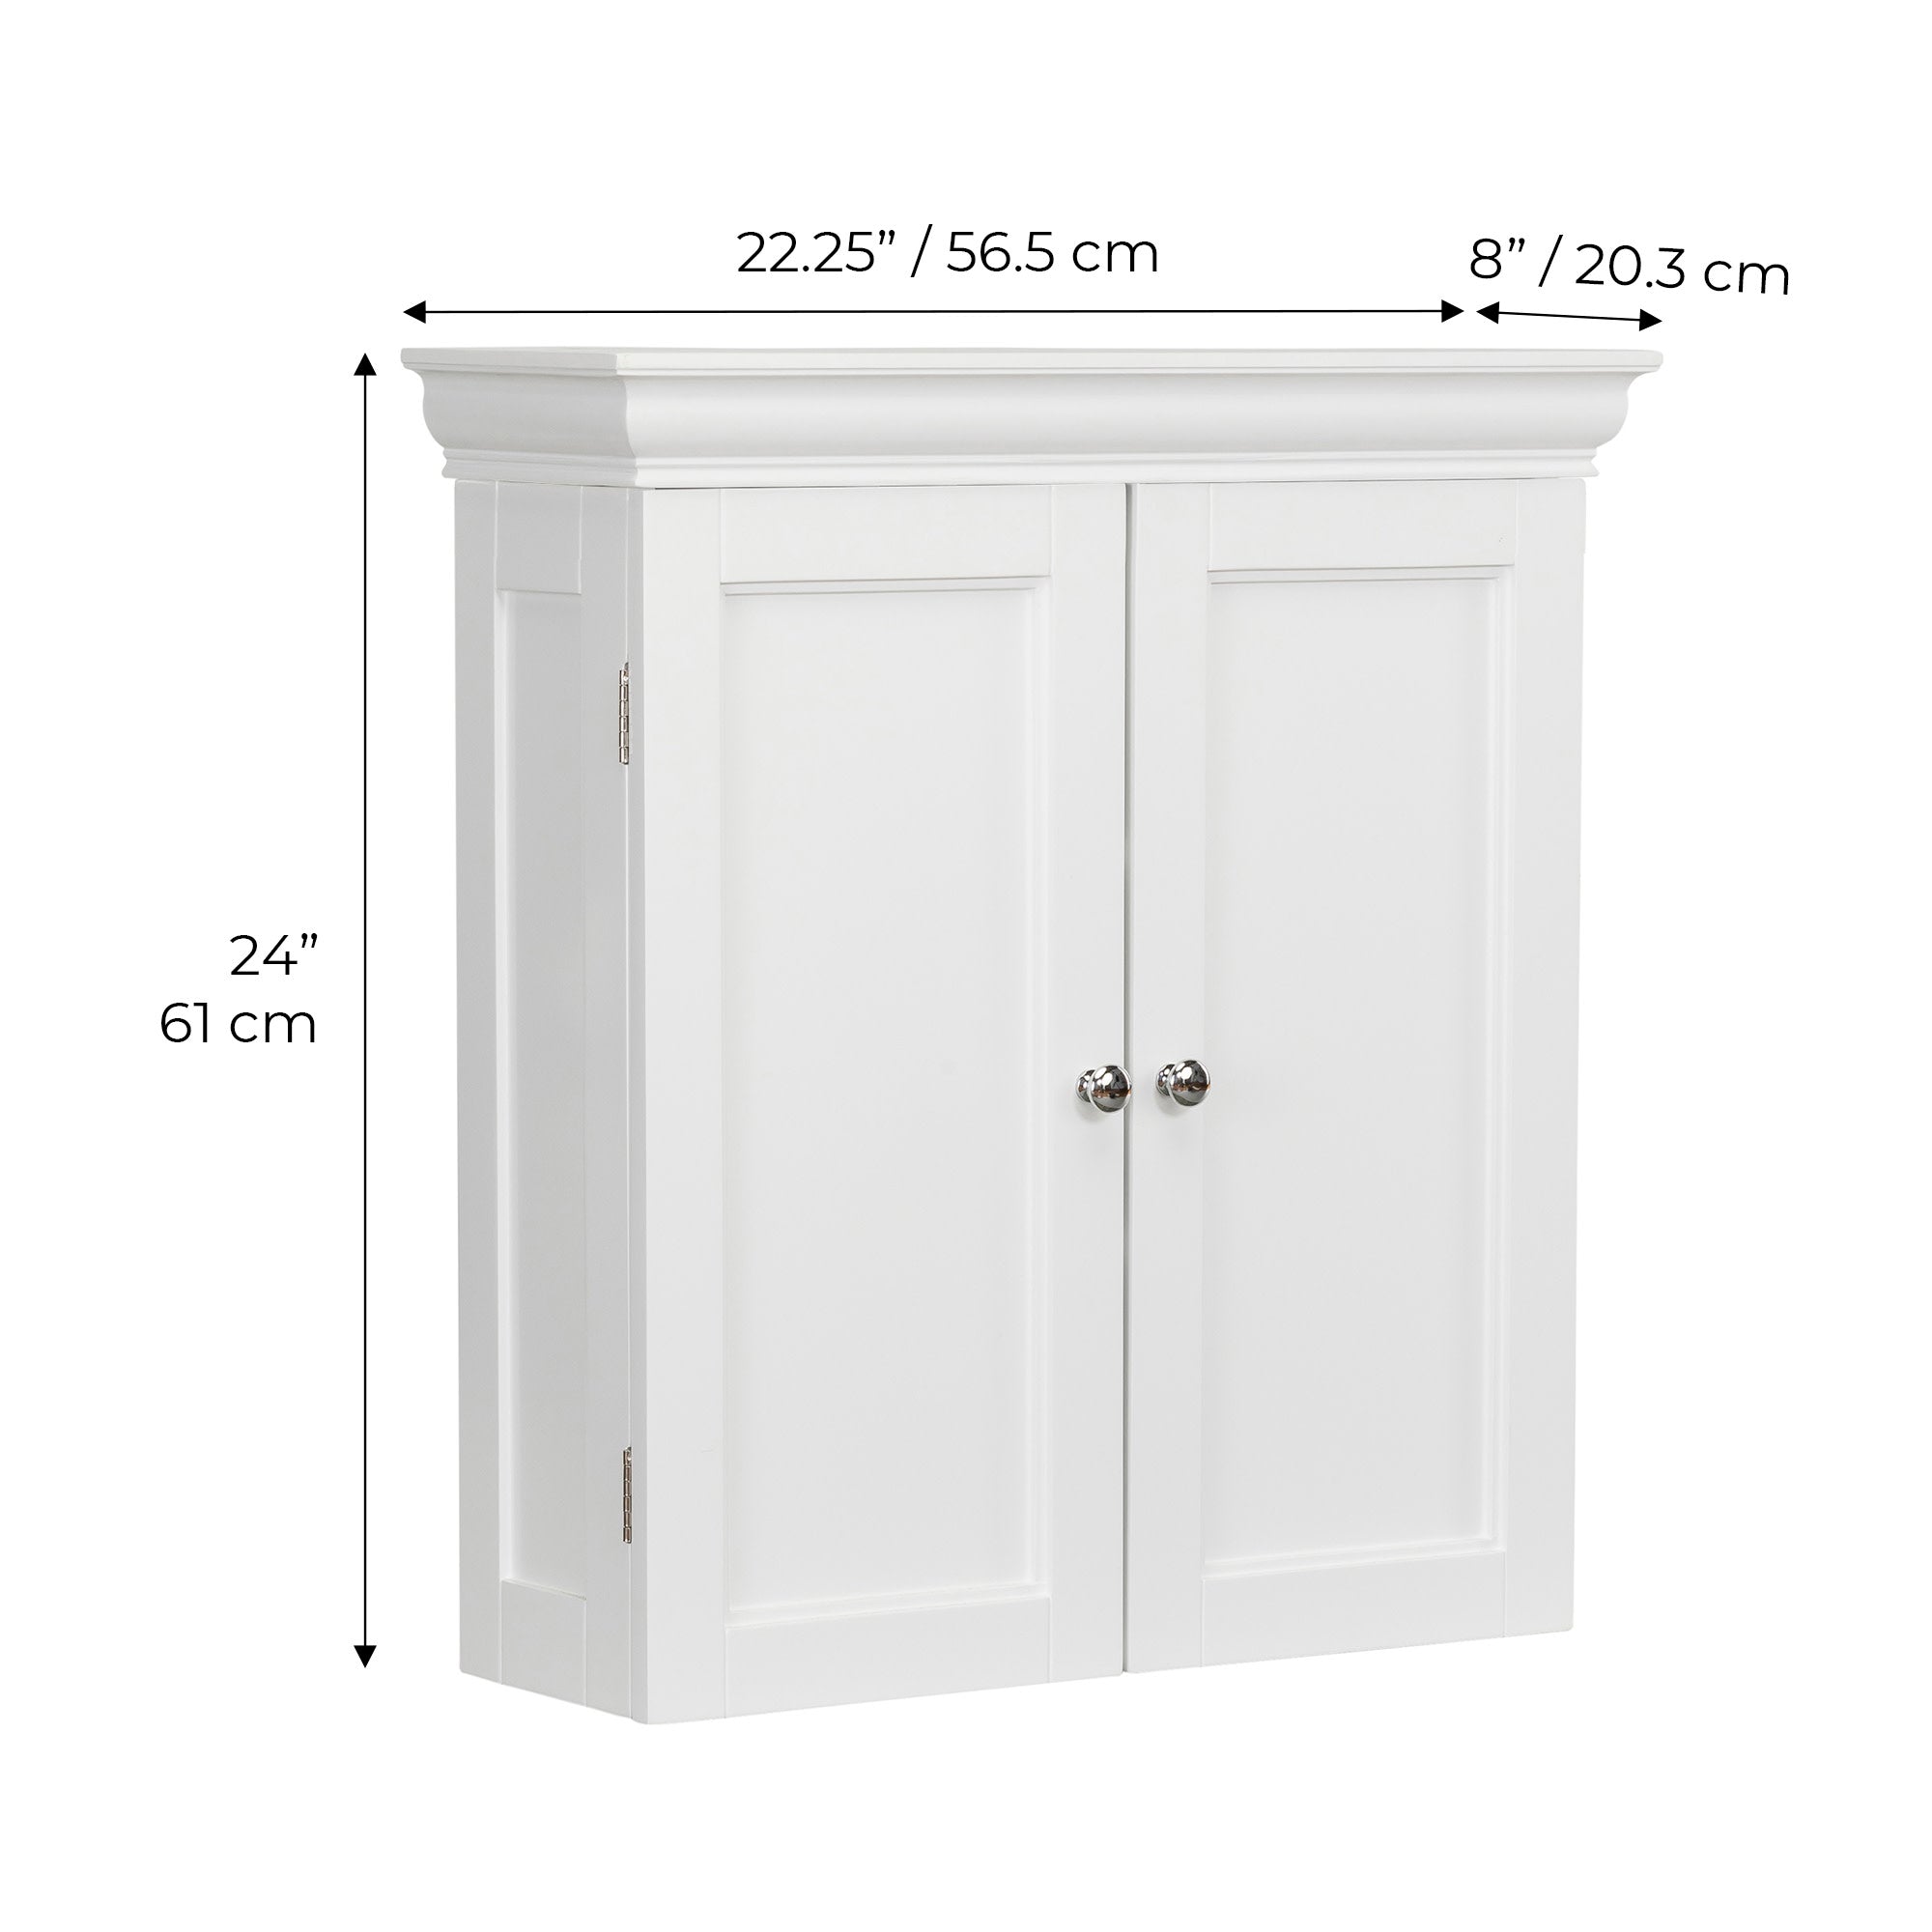 Teamson Home Stratford Two Door Removable Wall Cabinet with Two Contemporary Style Doors, White